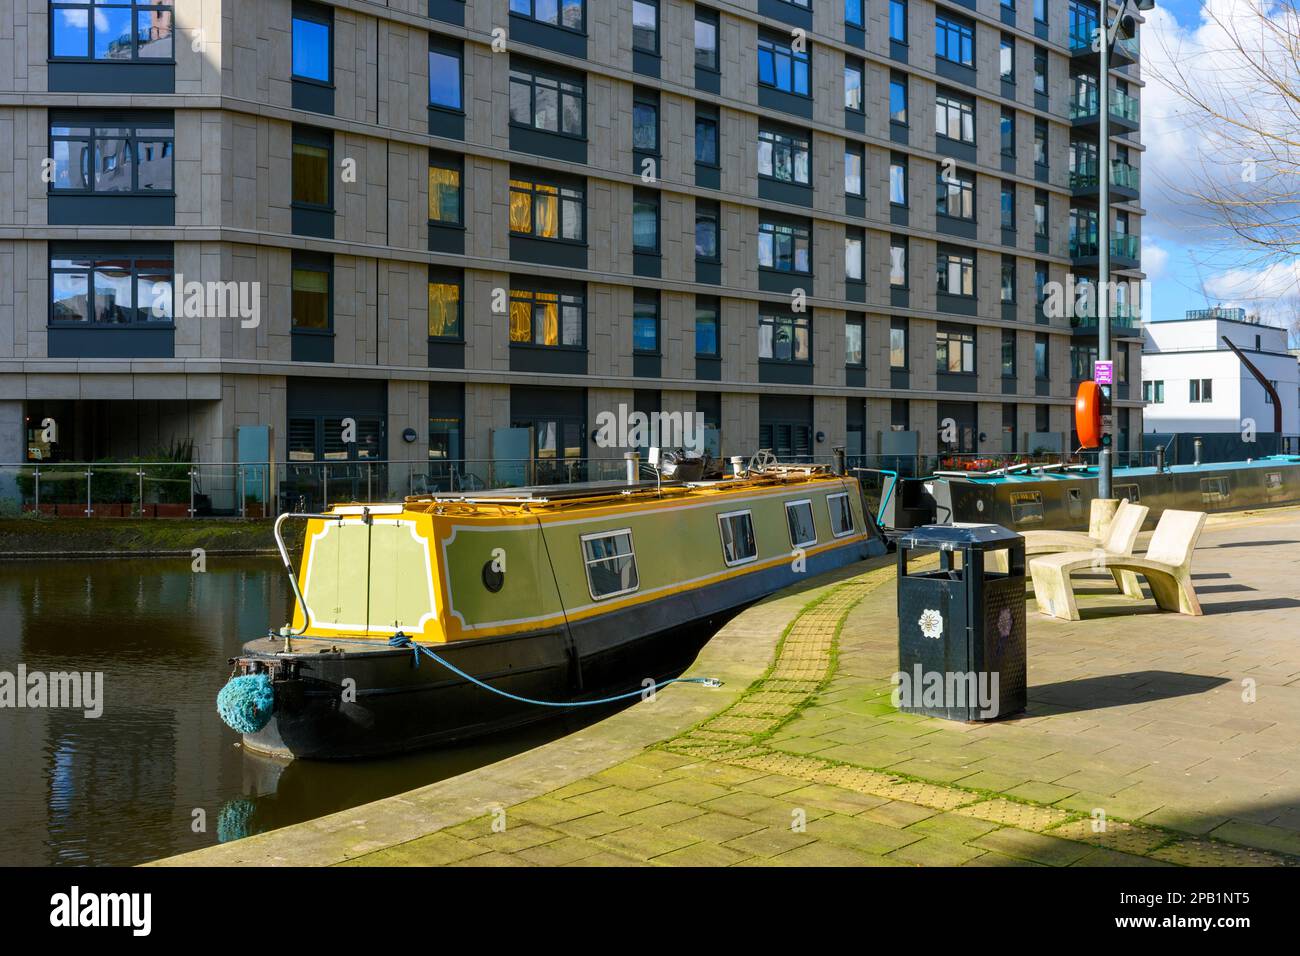 The One Vesta Street apartment block with a canal narrowboat in the foreground, New Islington, Ancoats, Manchester, England, UK Stock Photo